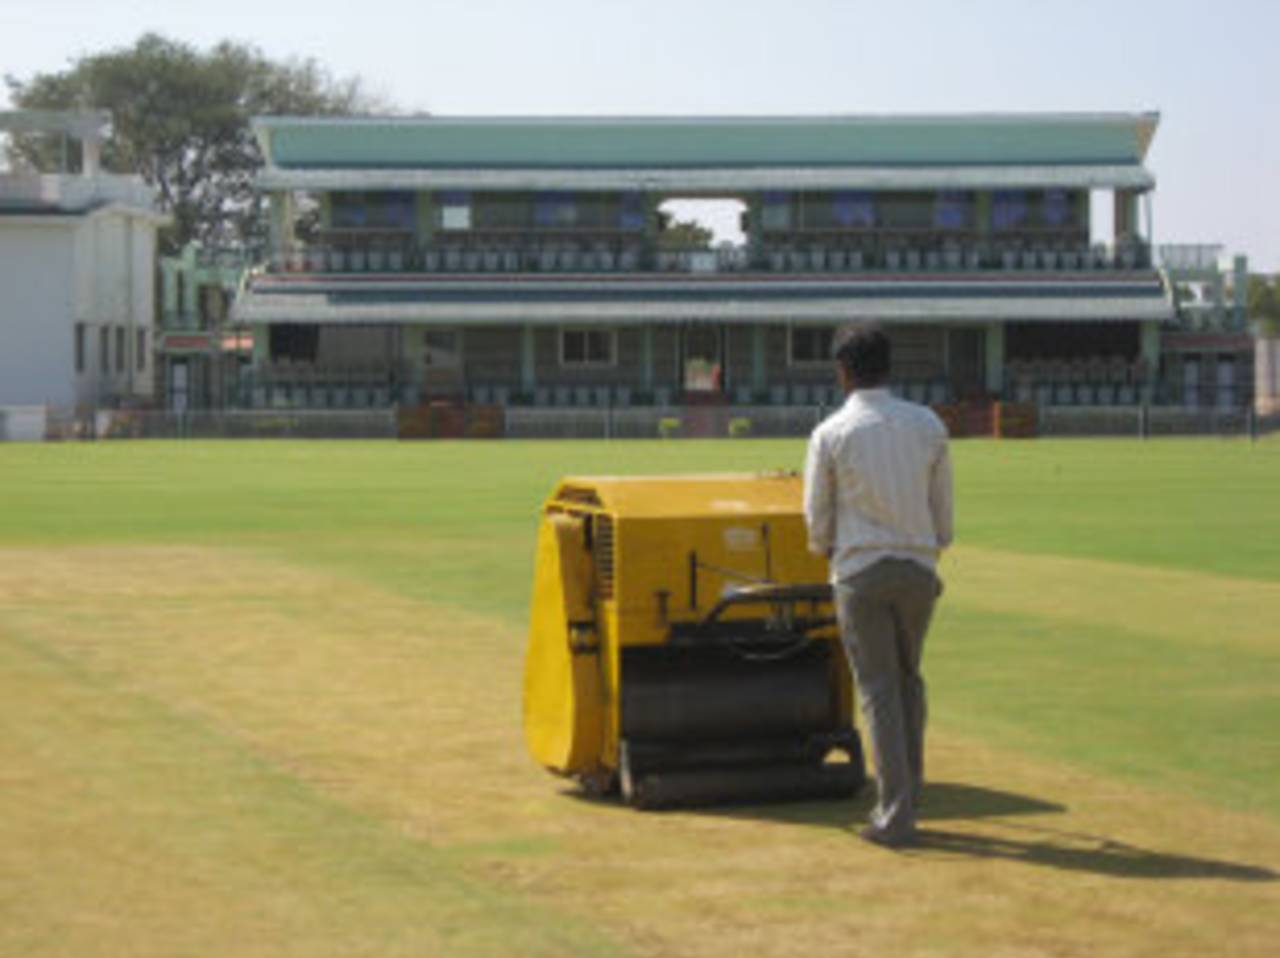 The pitch being rolled at the Rural Development Trust Stadium, Anantapur, January 28, 2012